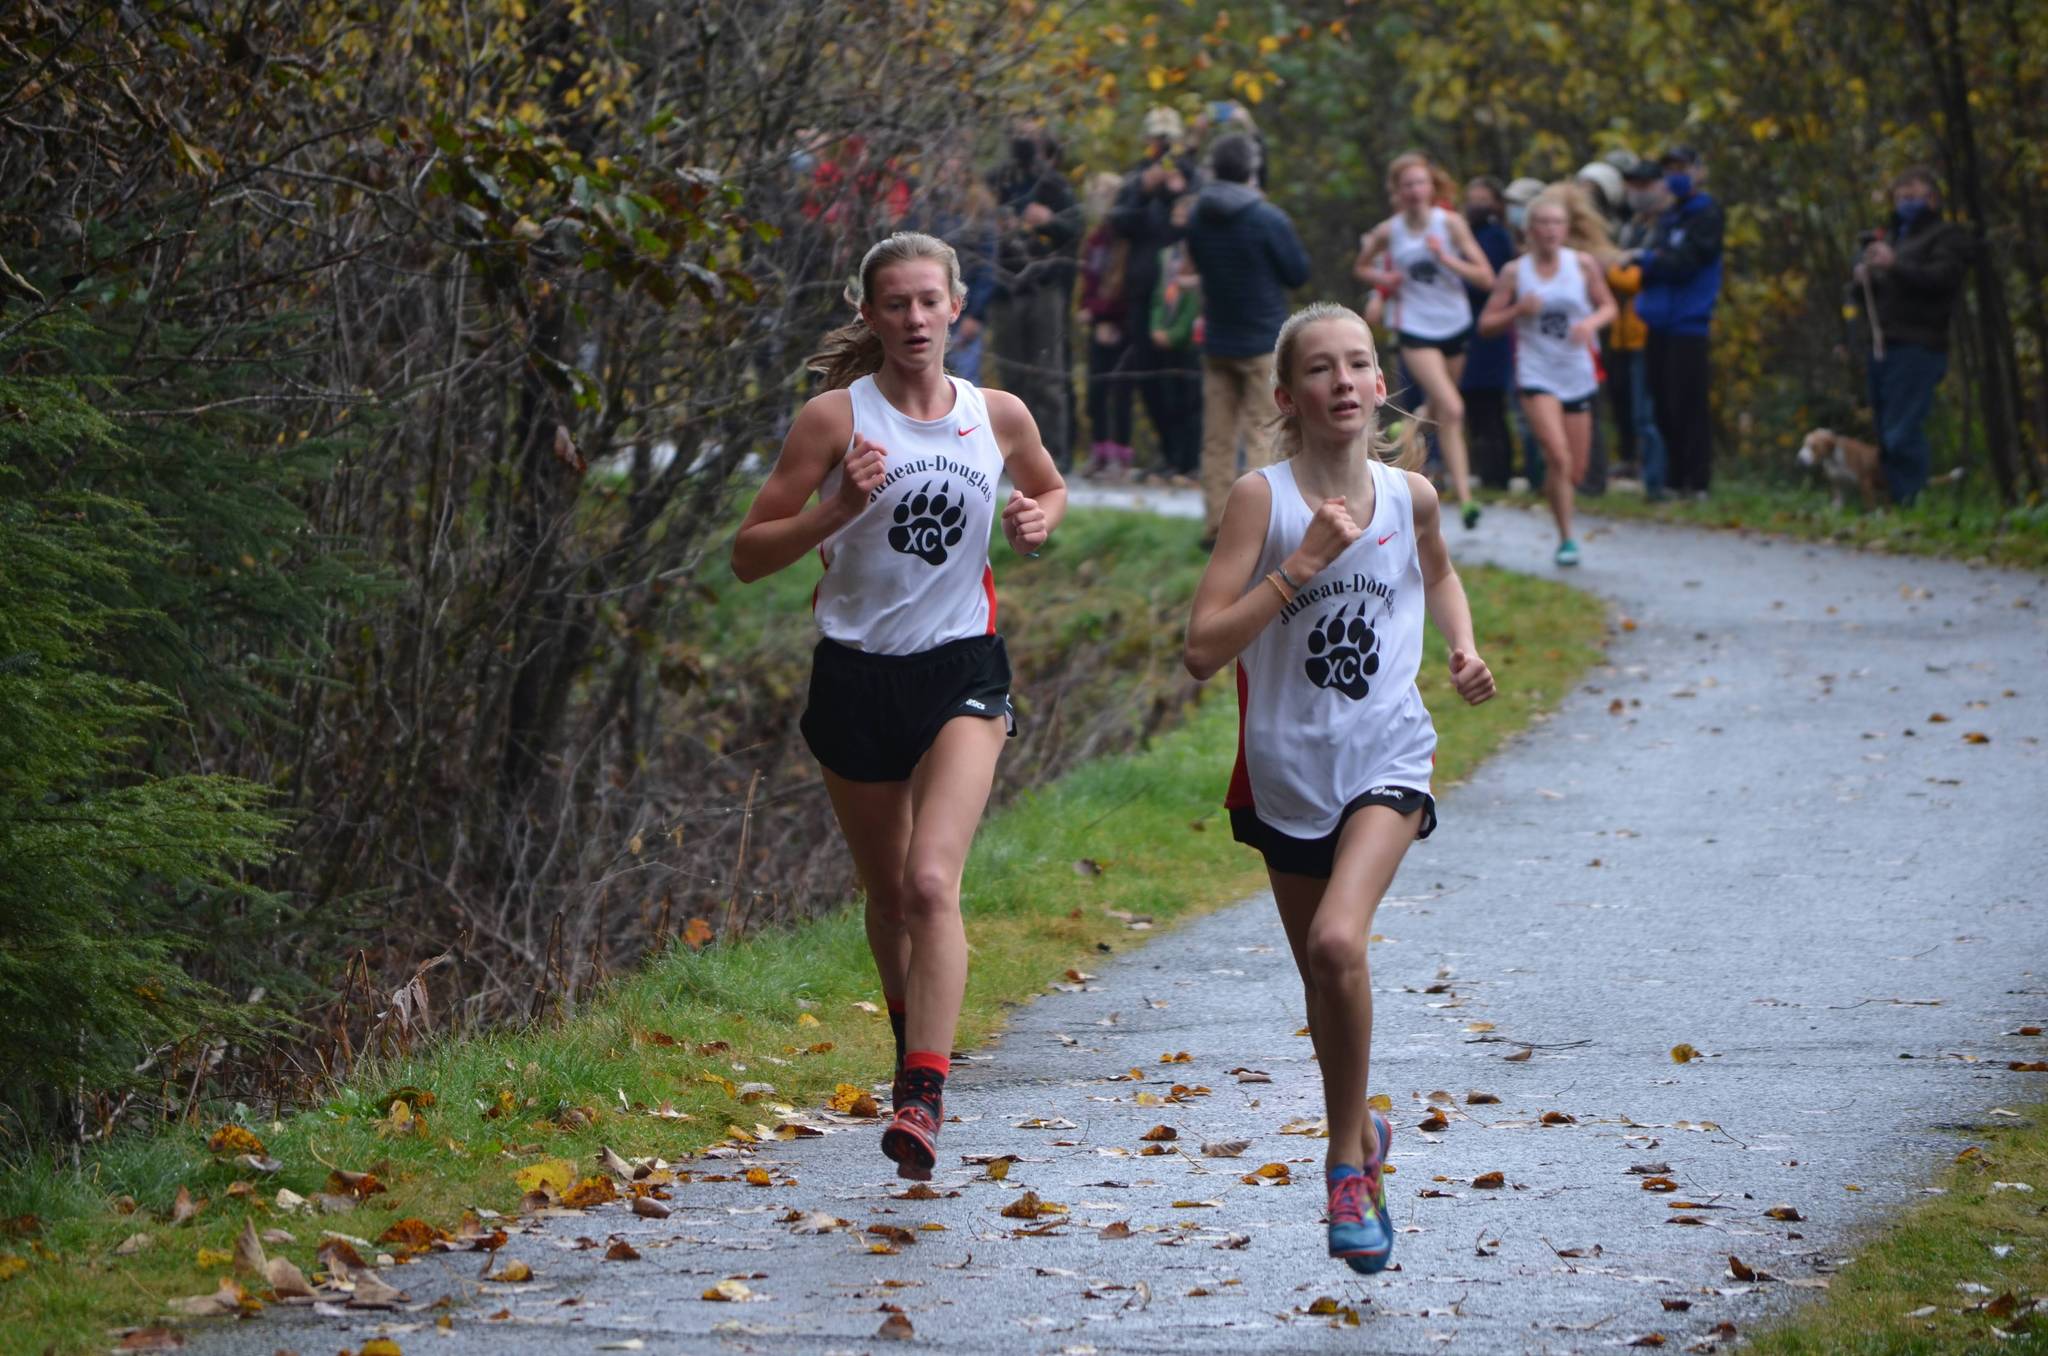 Juneau-Douglas Yadaa.at Kalé High School students Rayna Tuckwood (right) and Skylar Tuckwood (left) race at the Thunder Mountain High School cross country race course during a regionals meet, Oct. 3, 2020. (Courtesy photo / Debbie Lowenthal)